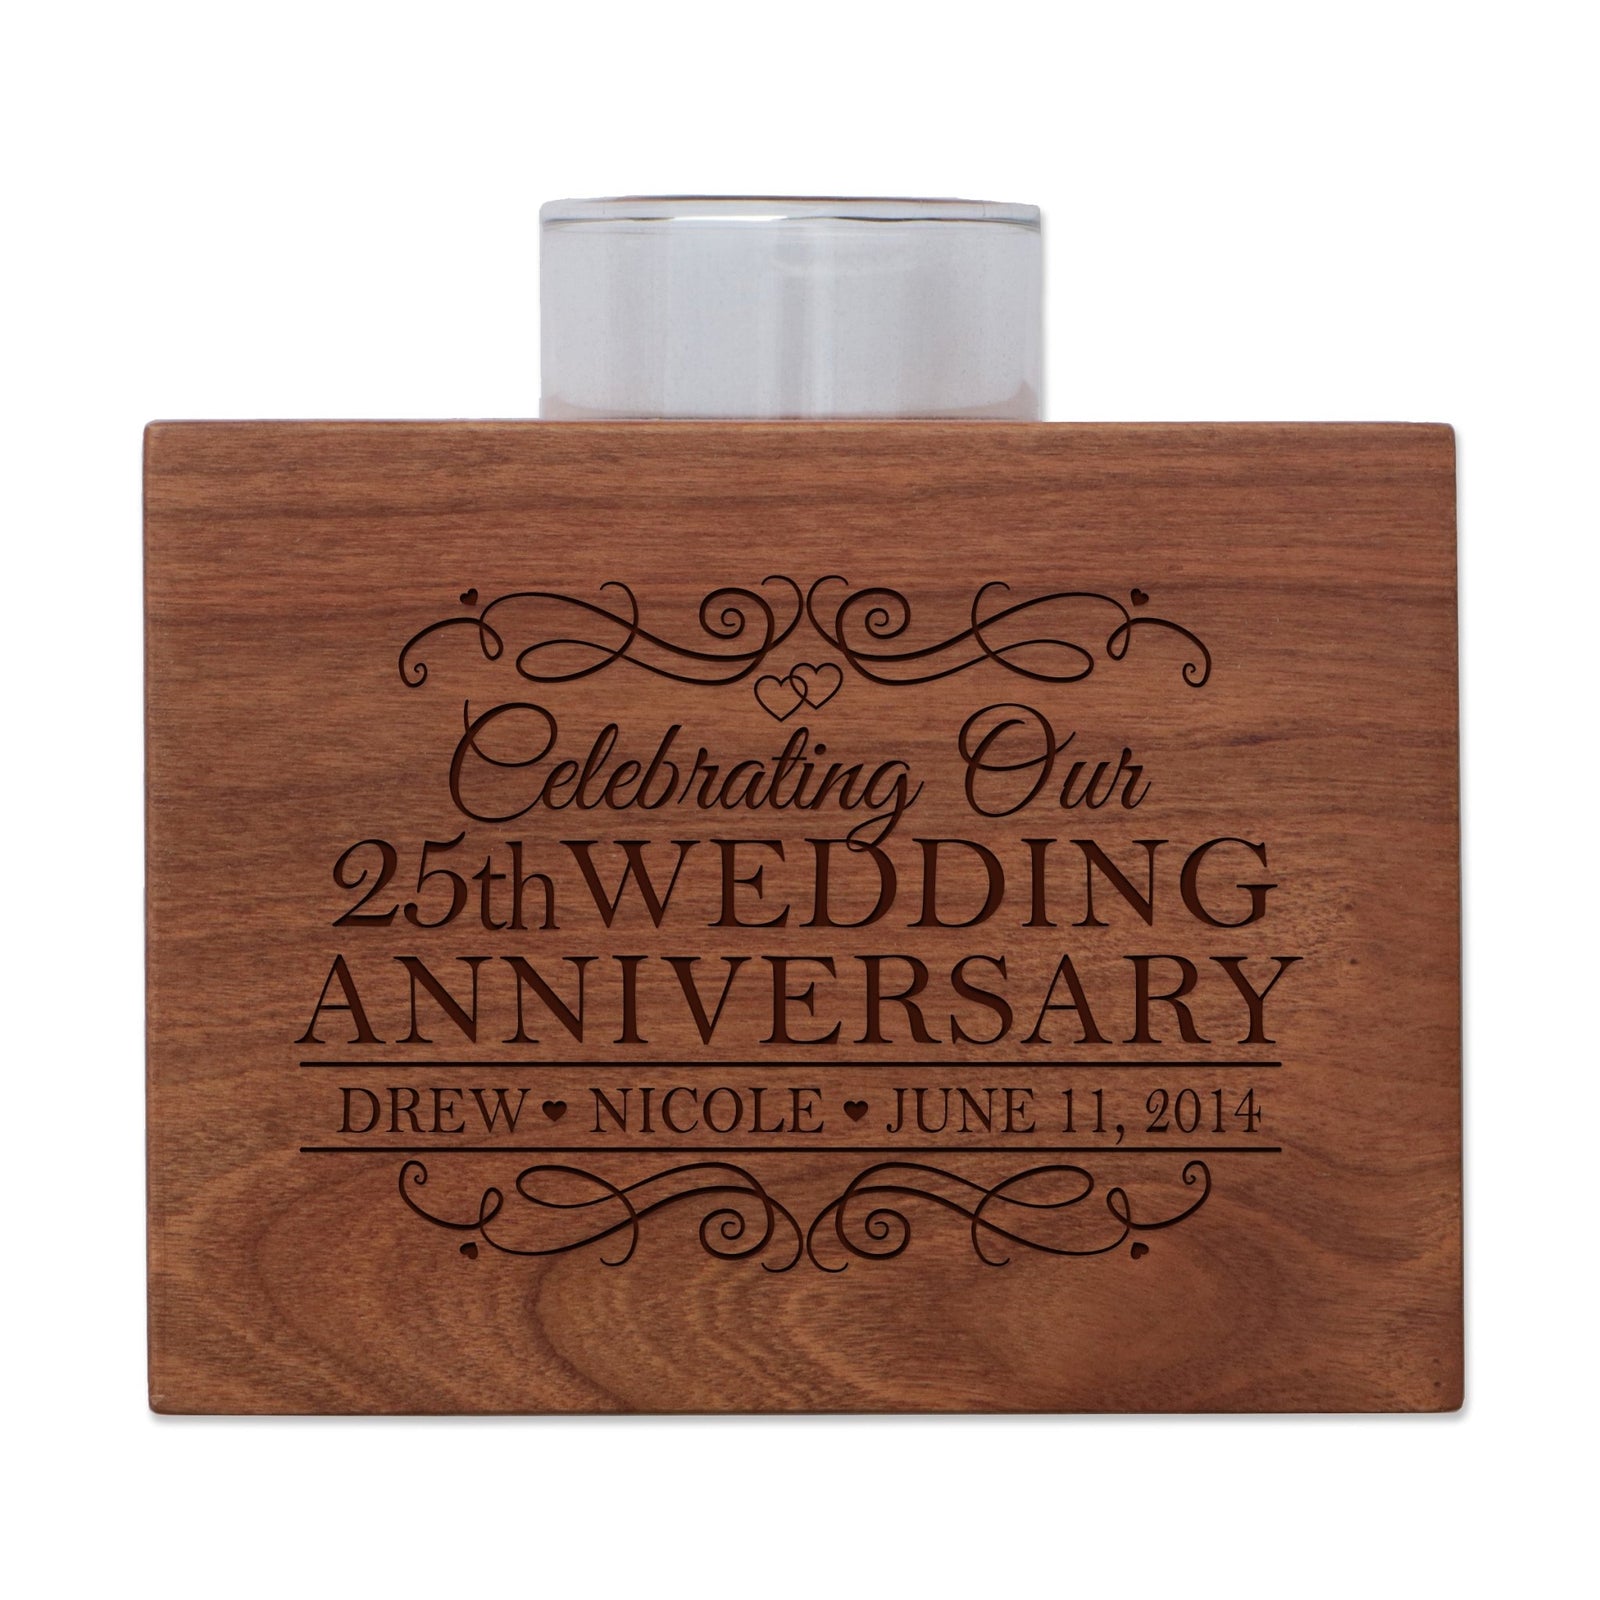 Personalized Cherry Wood Single Votive Candle Holder - 25th Wedding Anniversary - LifeSong Milestones